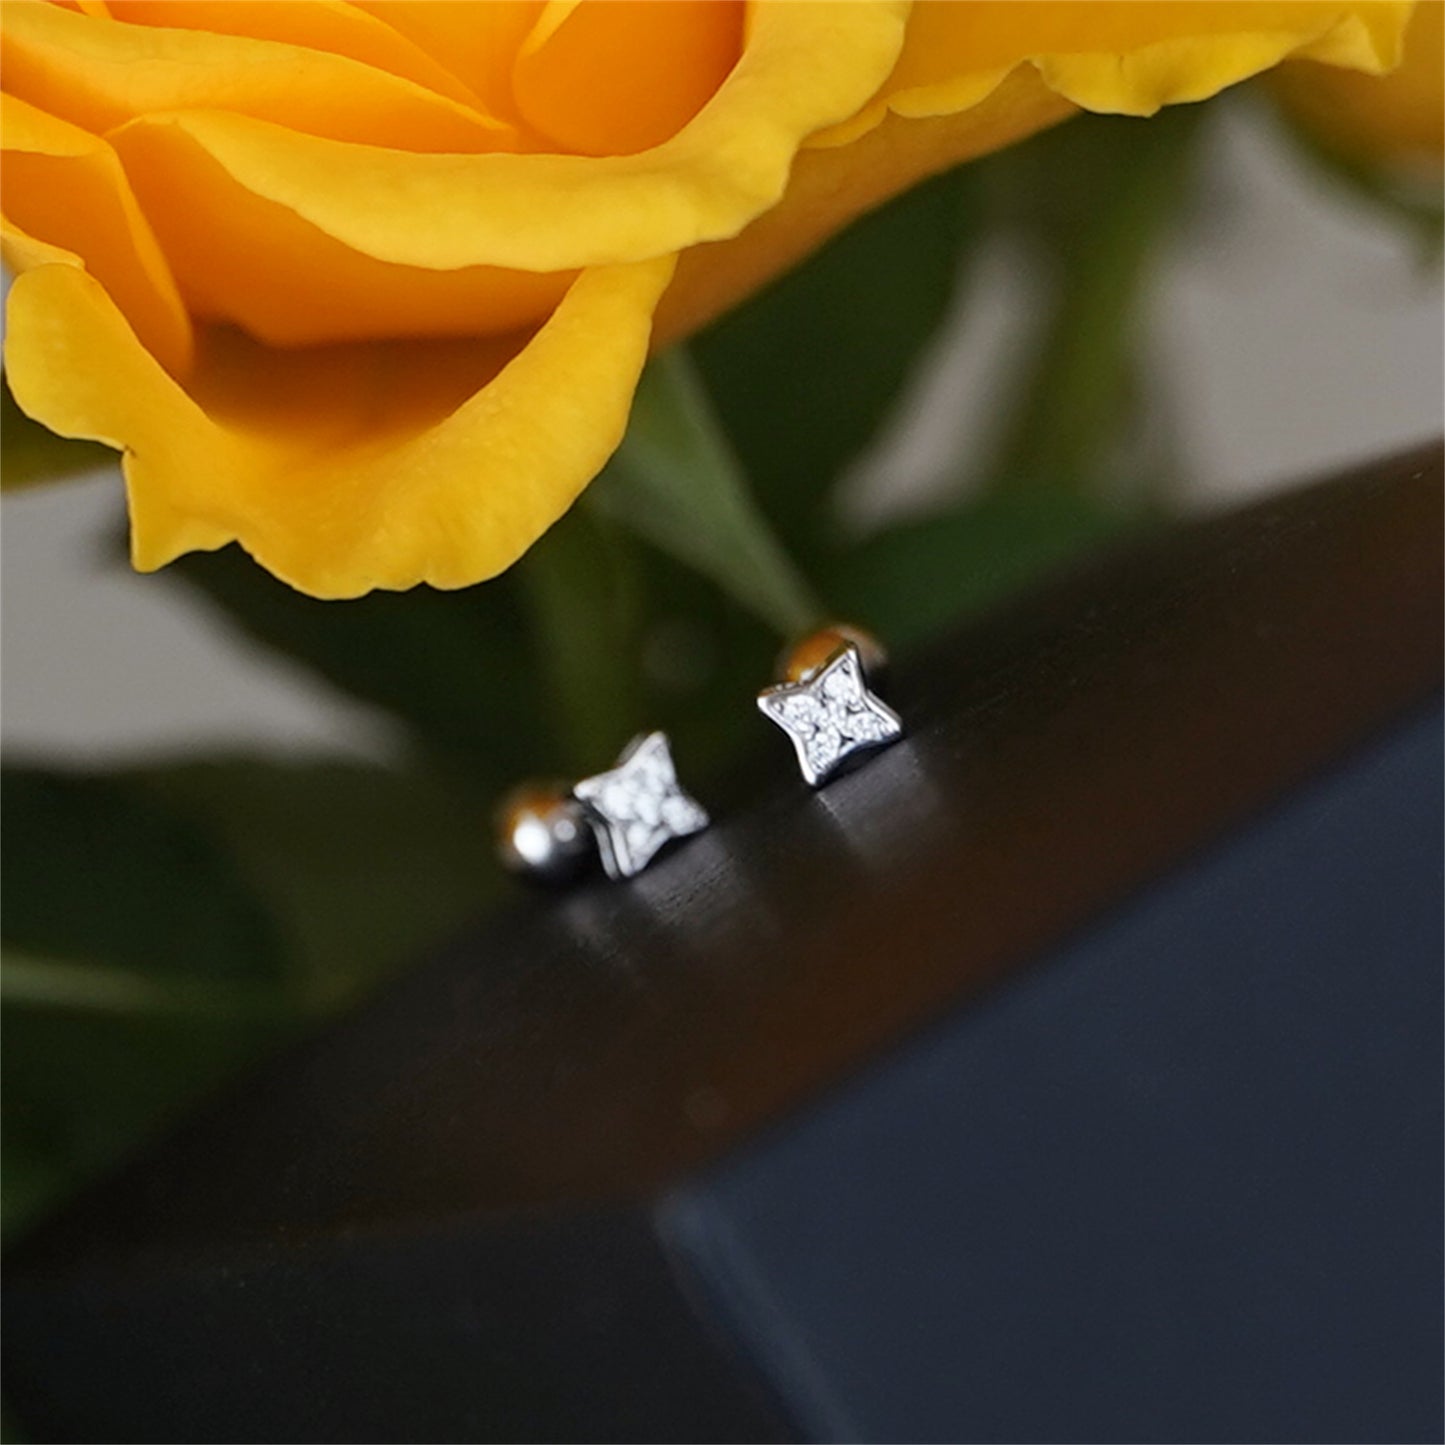 Mini Star Stud Earrings in Sterling Silver with CZ Bead and Ball Screw Back - sugarkittenlondon